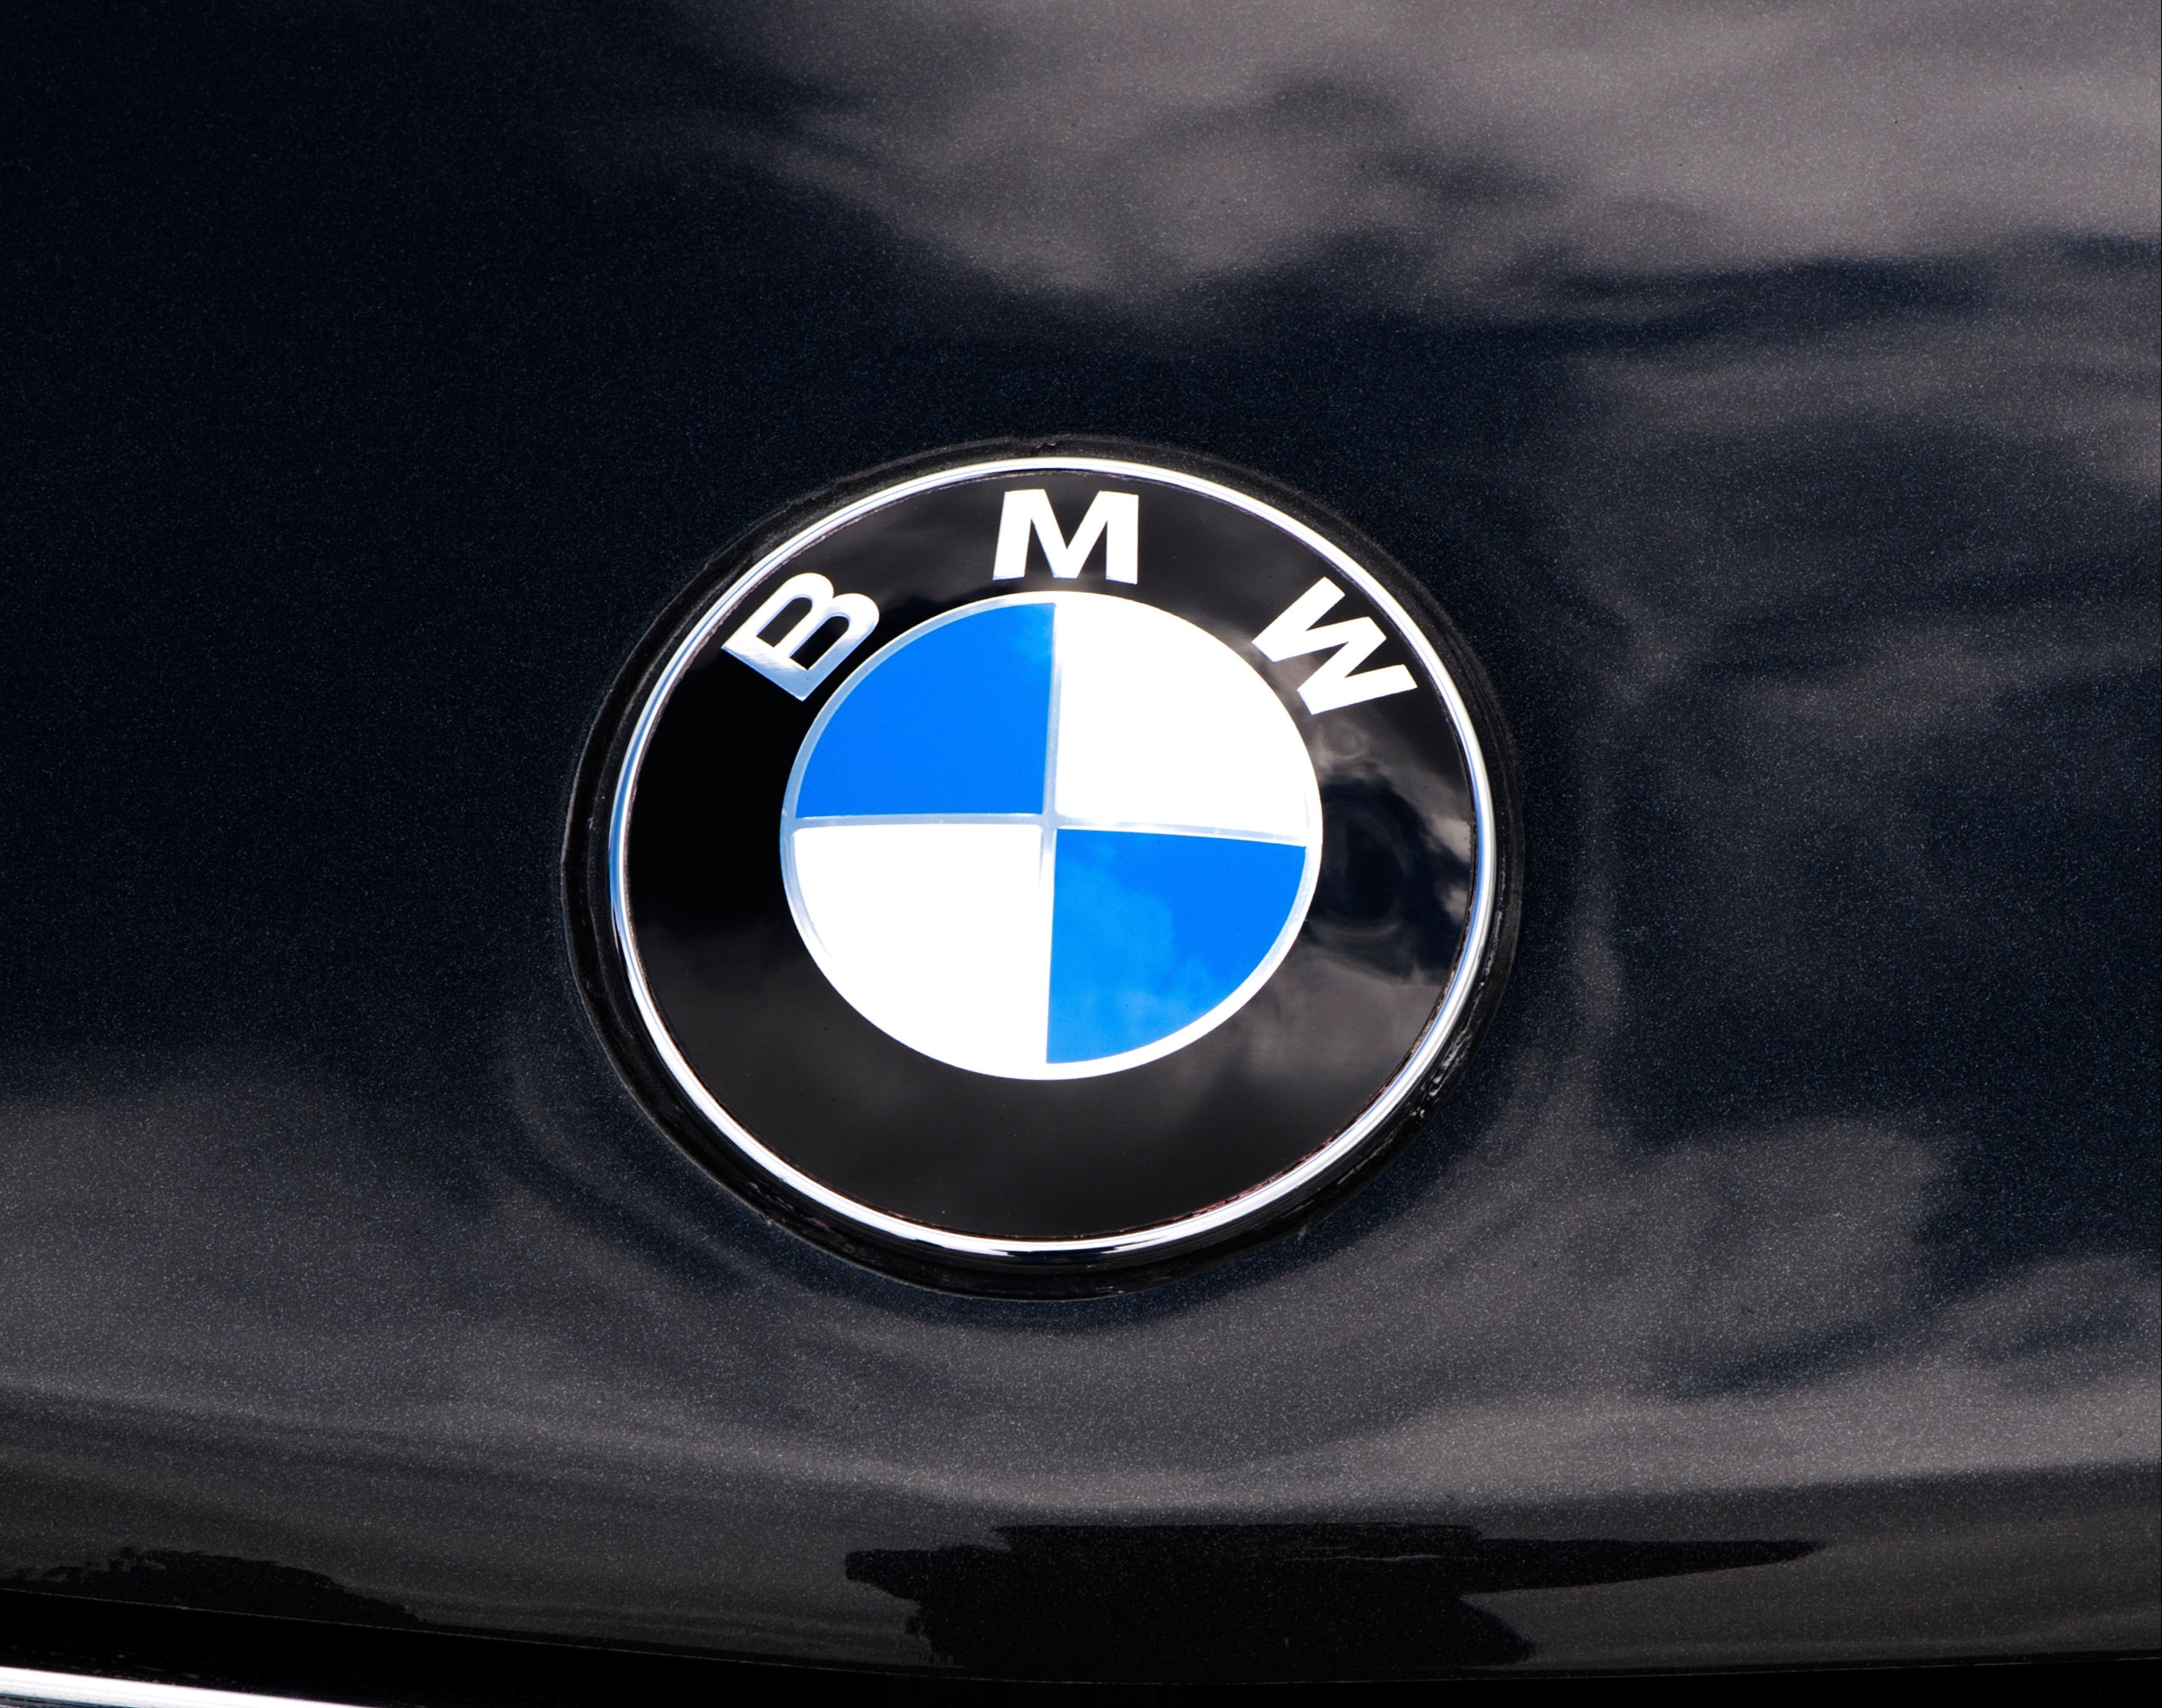 The Dieselgate scandal means many BMW owners could claim up to £10,000